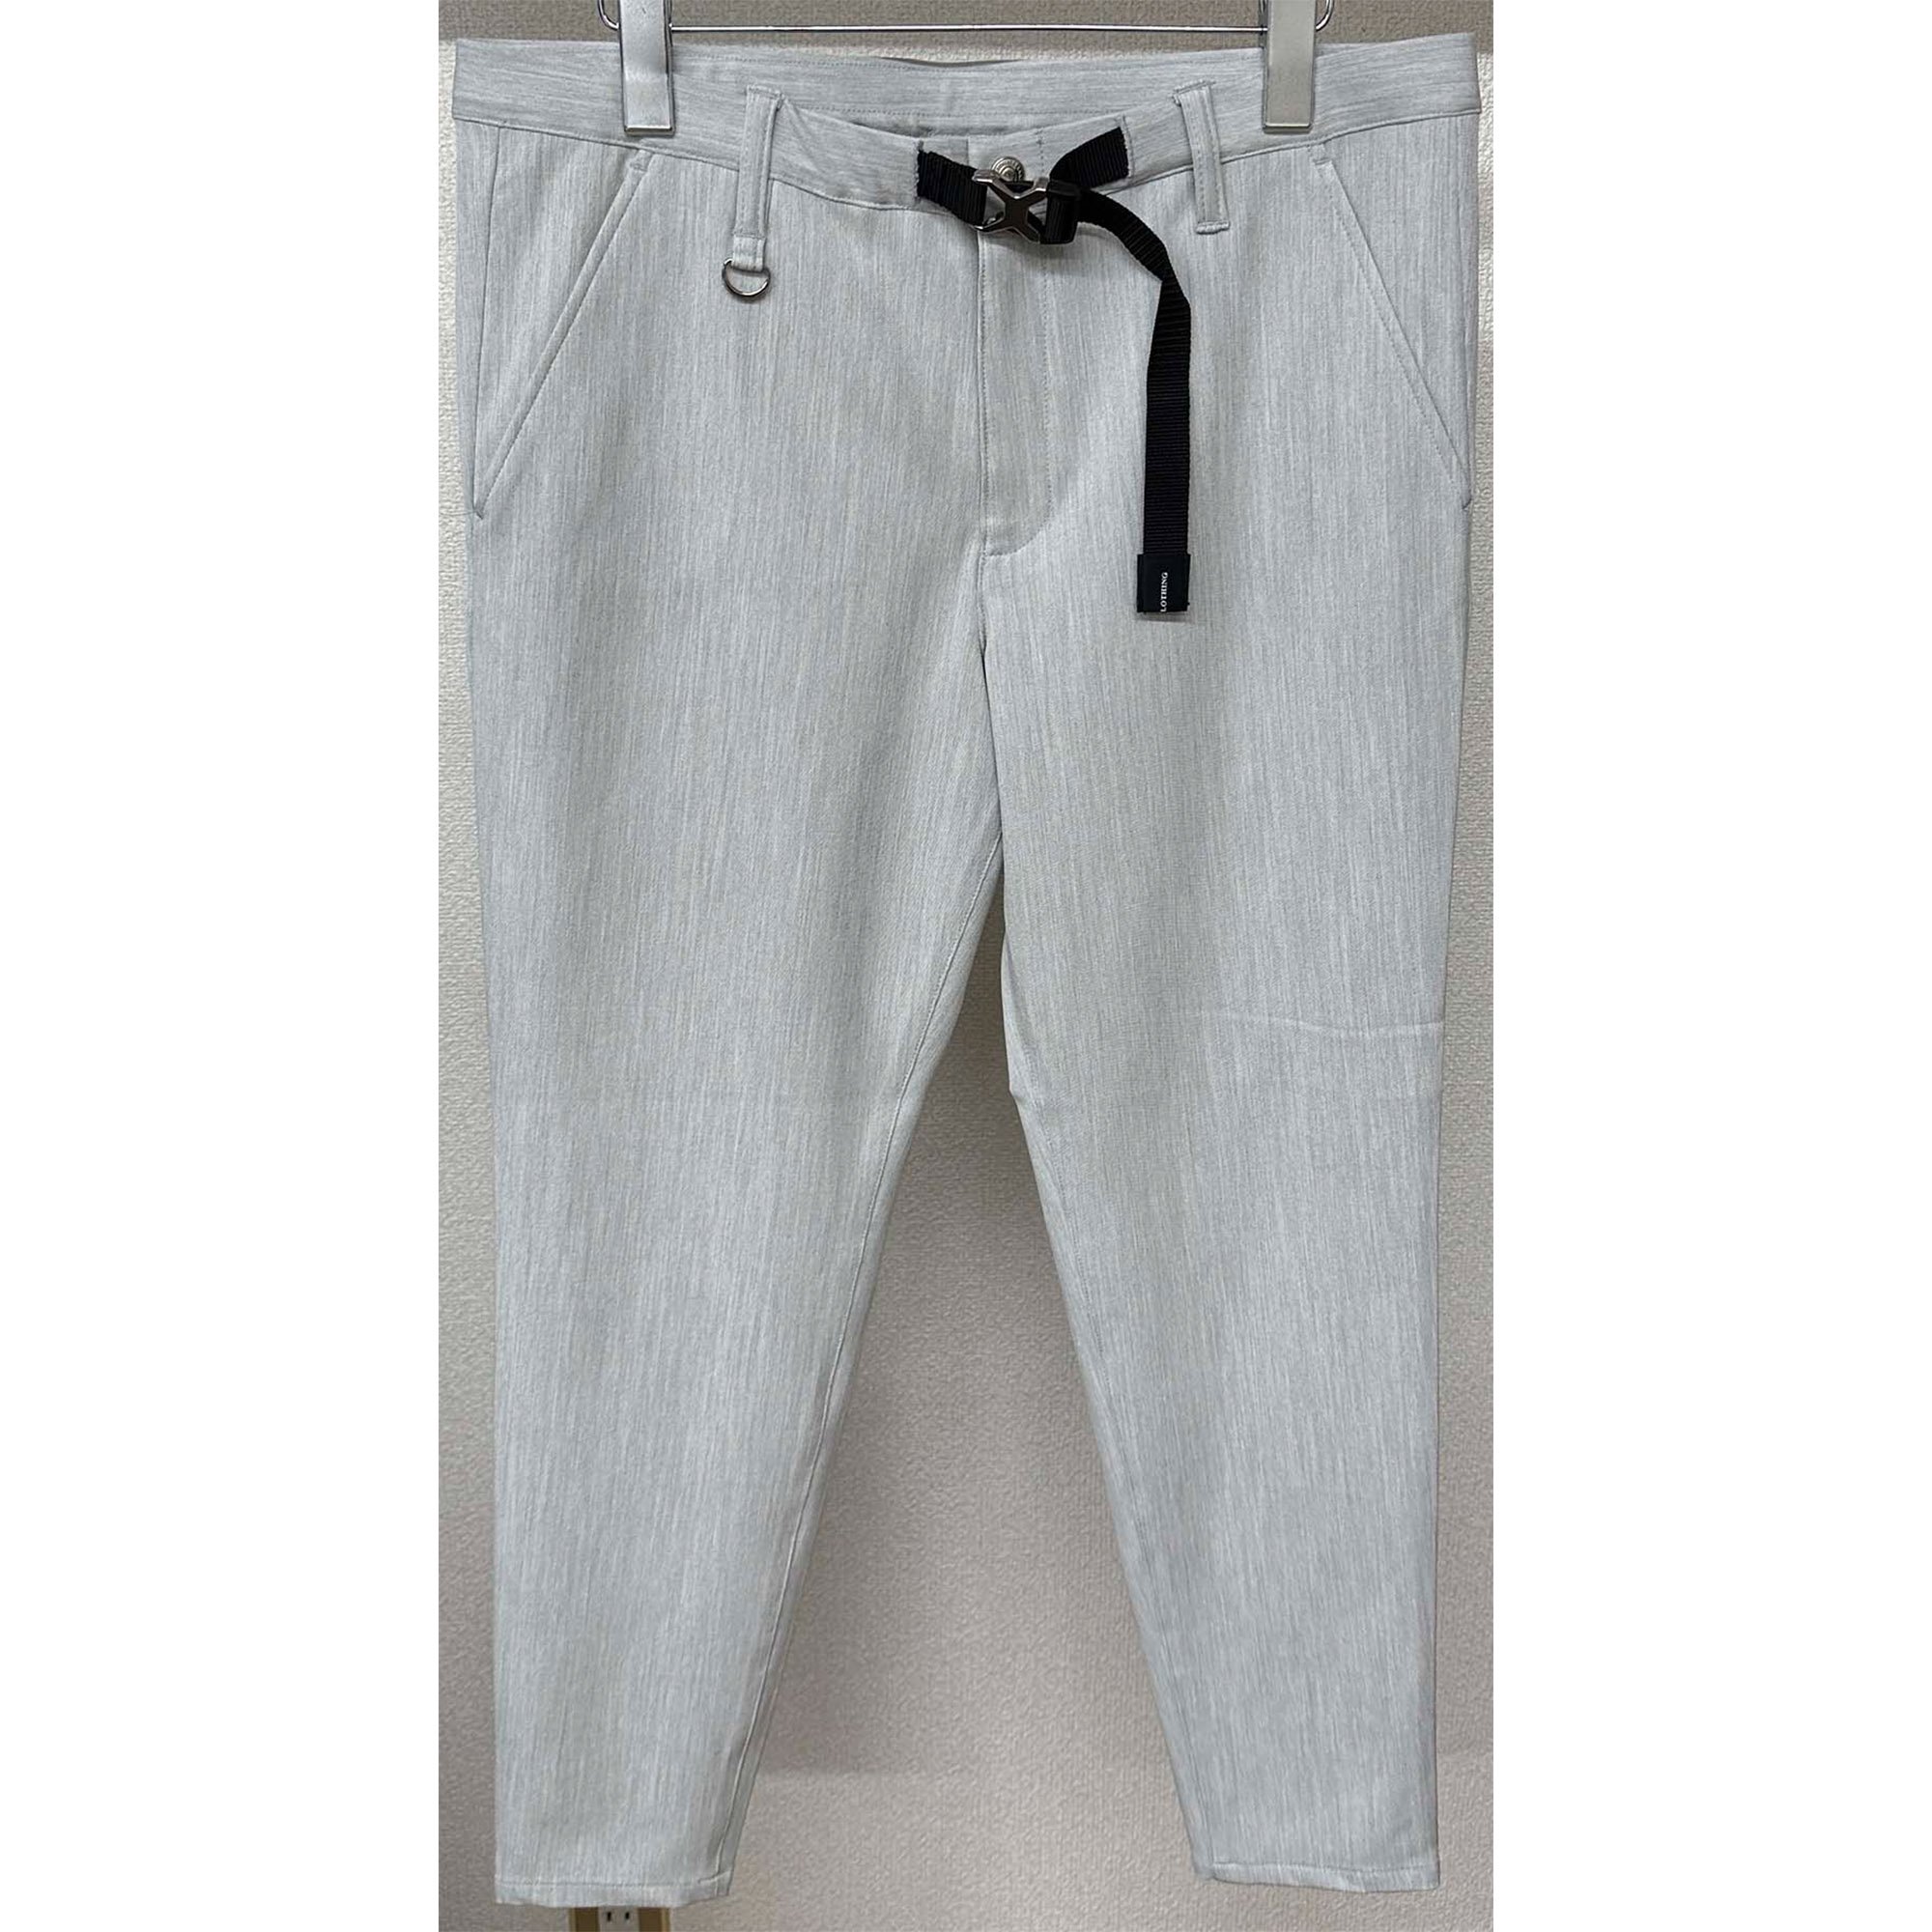 <img class='new_mark_img1' src='https://img.shop-pro.jp/img/new/icons1.gif' style='border:none;display:inline;margin:0px;padding:0px;width:auto;' />PAT TIGHT EASY PANTS GREY